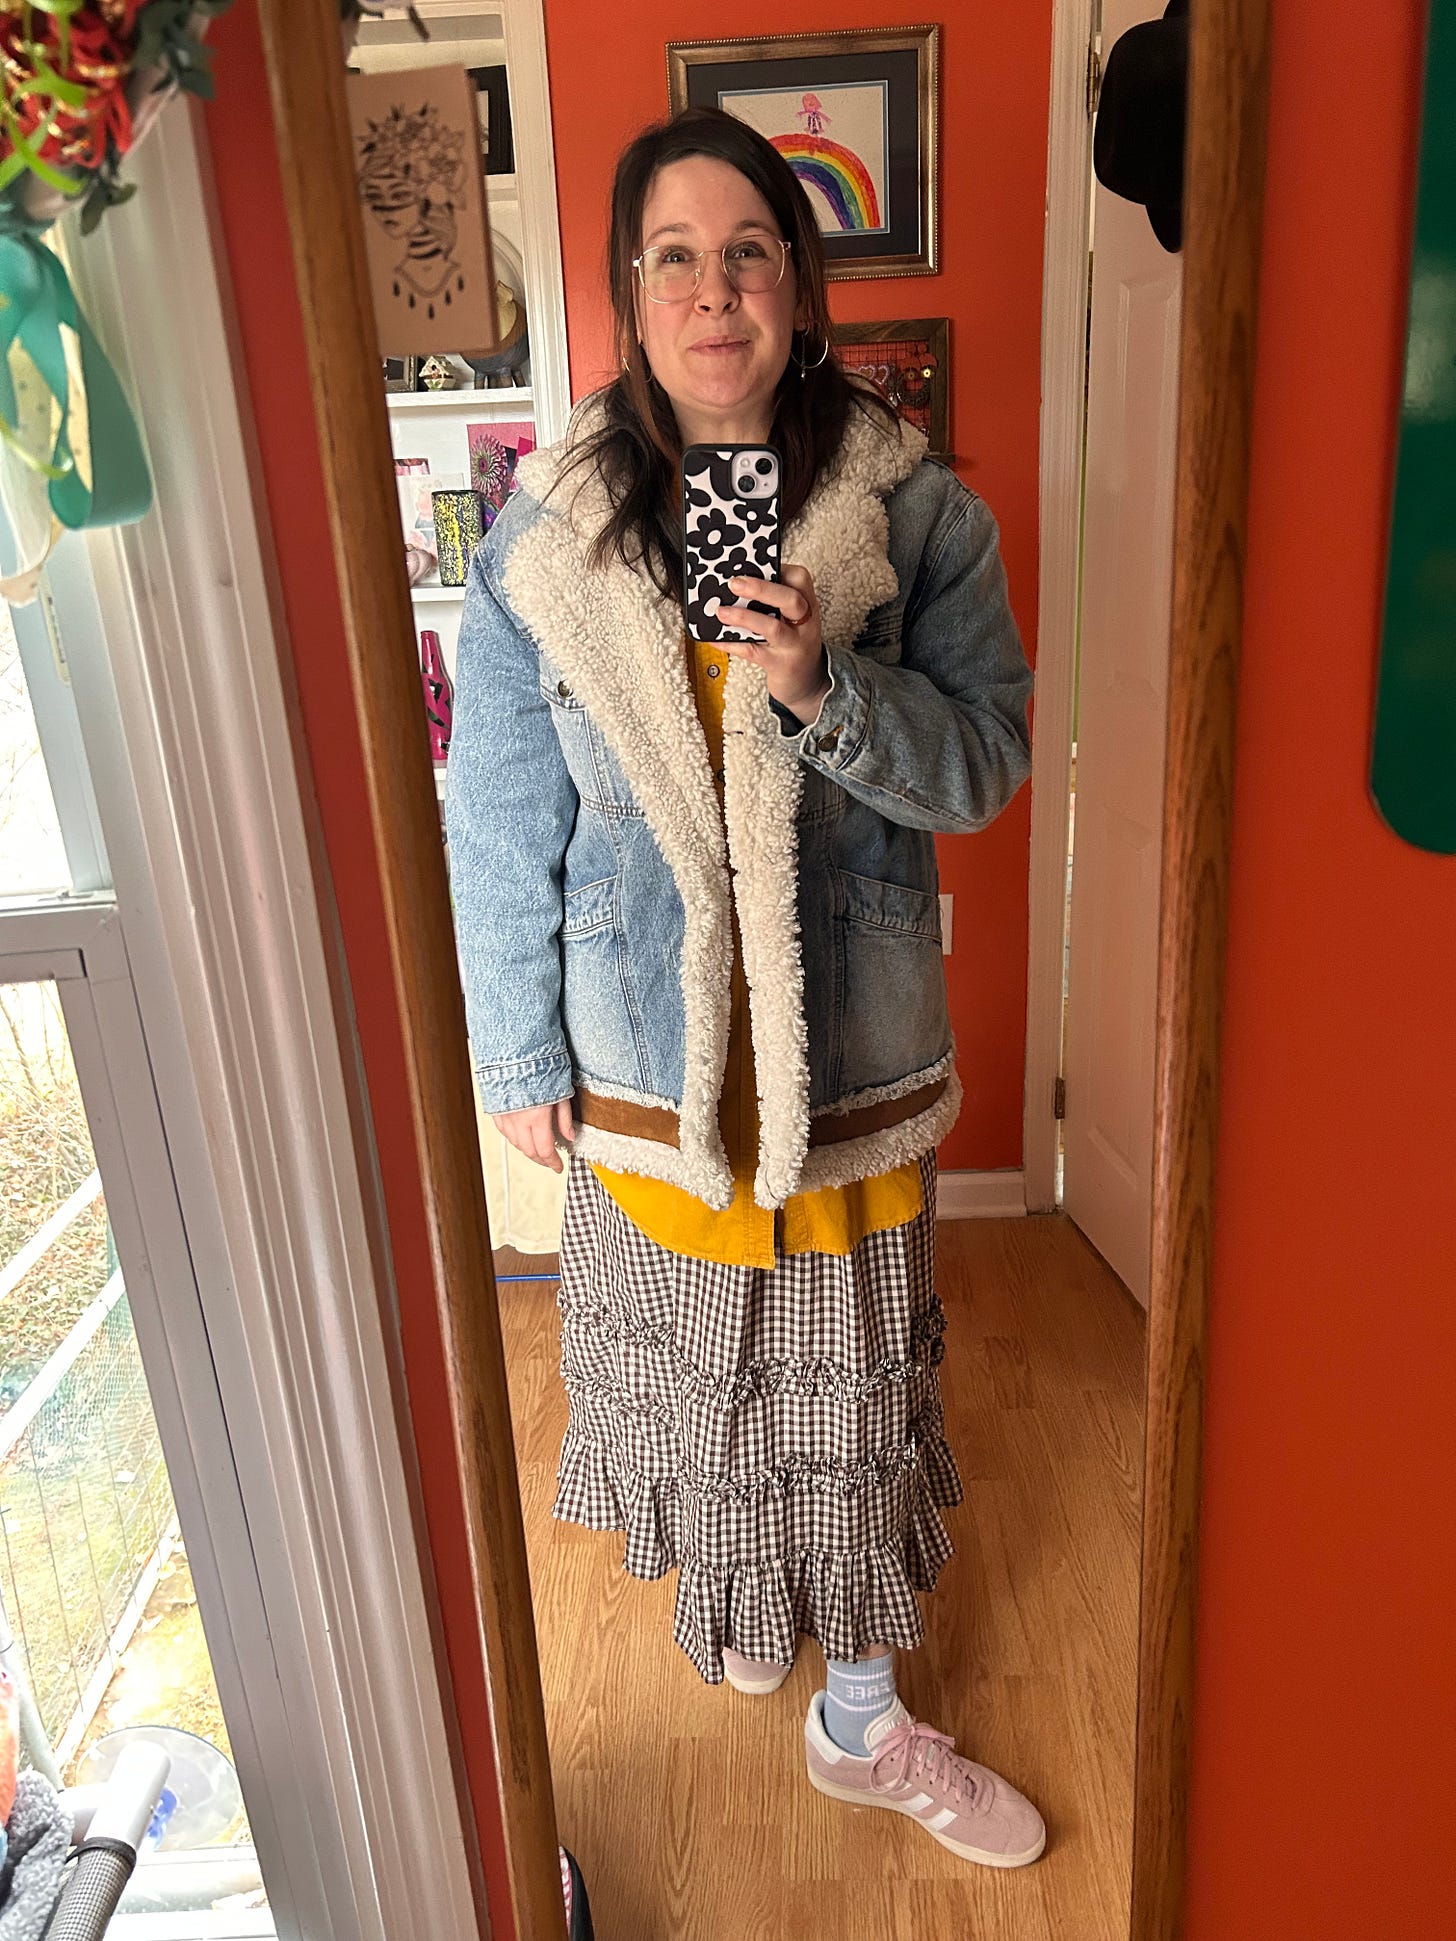 The picture shows a mirror selfie of Mary Adelle. She is wearing a puffy denim coat, yellow shirt, and brown checkered skirt, with her pink gazelles and blue socks. She looks very, very happy.